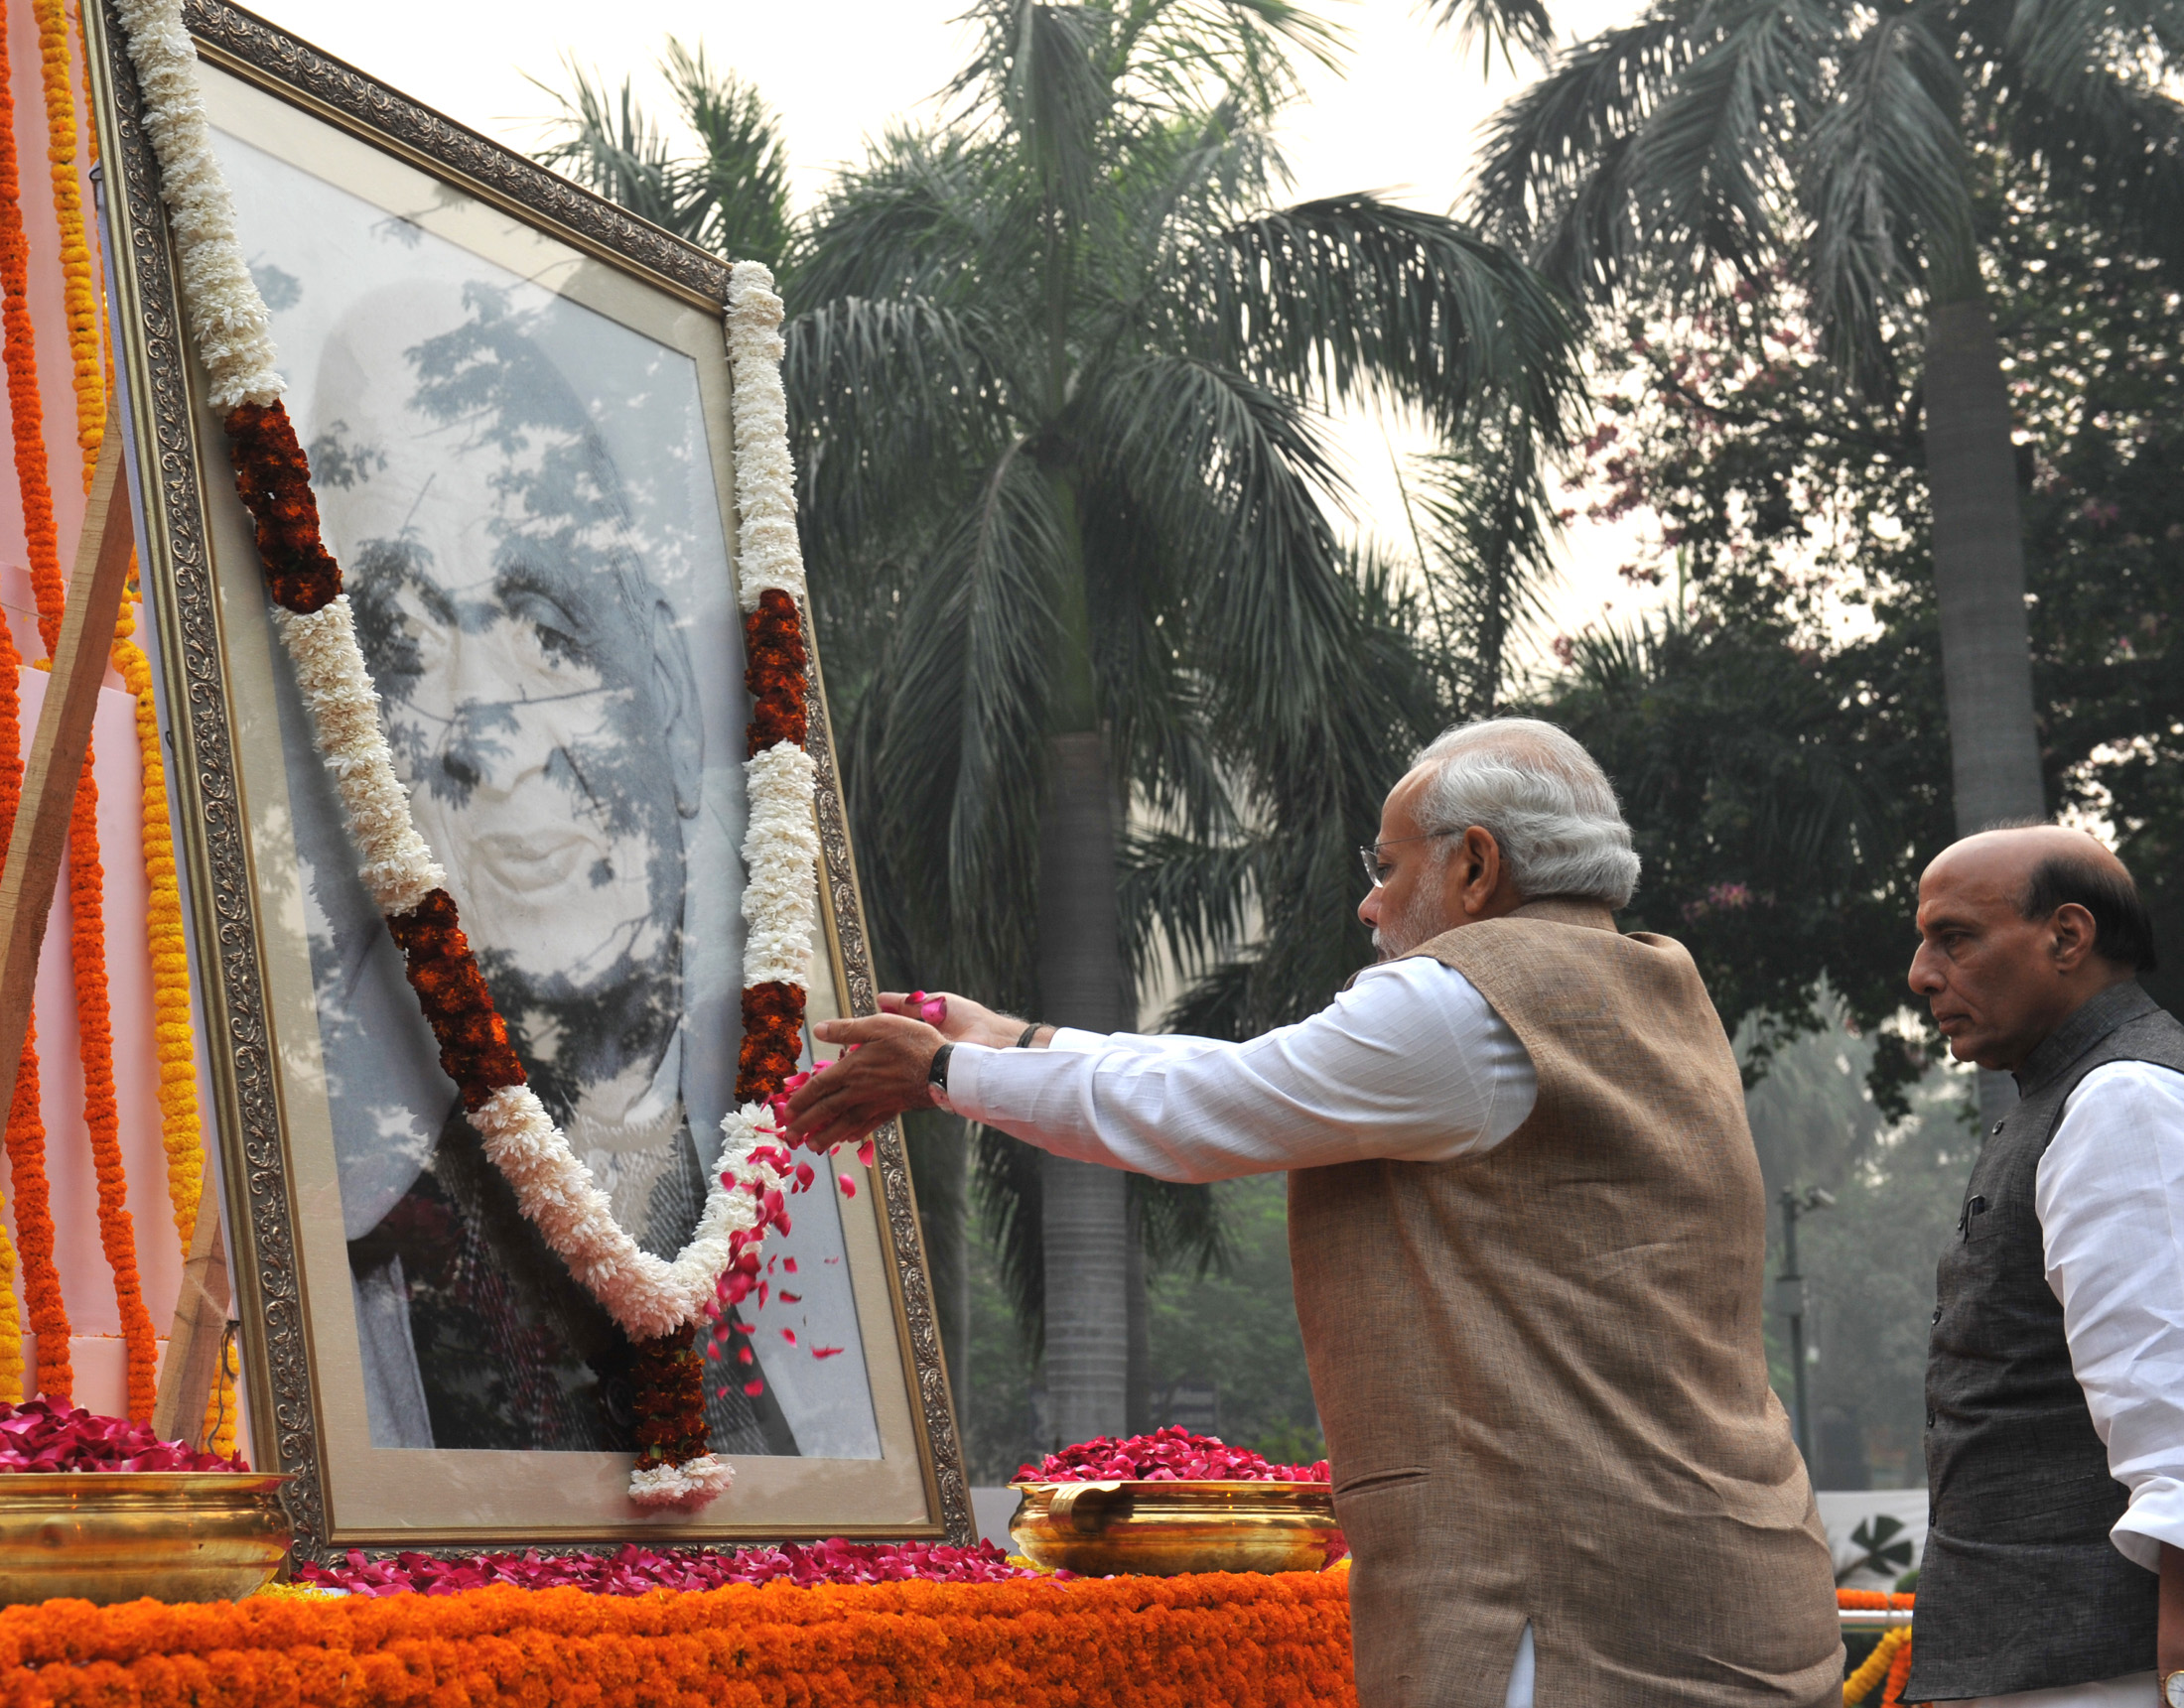 The Prime Minister, Shri Narendra Modi paying floral tributes at the statue of Sardar Vallabhbhai Patel, on Parliament Street, in New Delhi on October 31, 2015. 	The Union Home Minister, Shri Rajnath Singh is also seen.